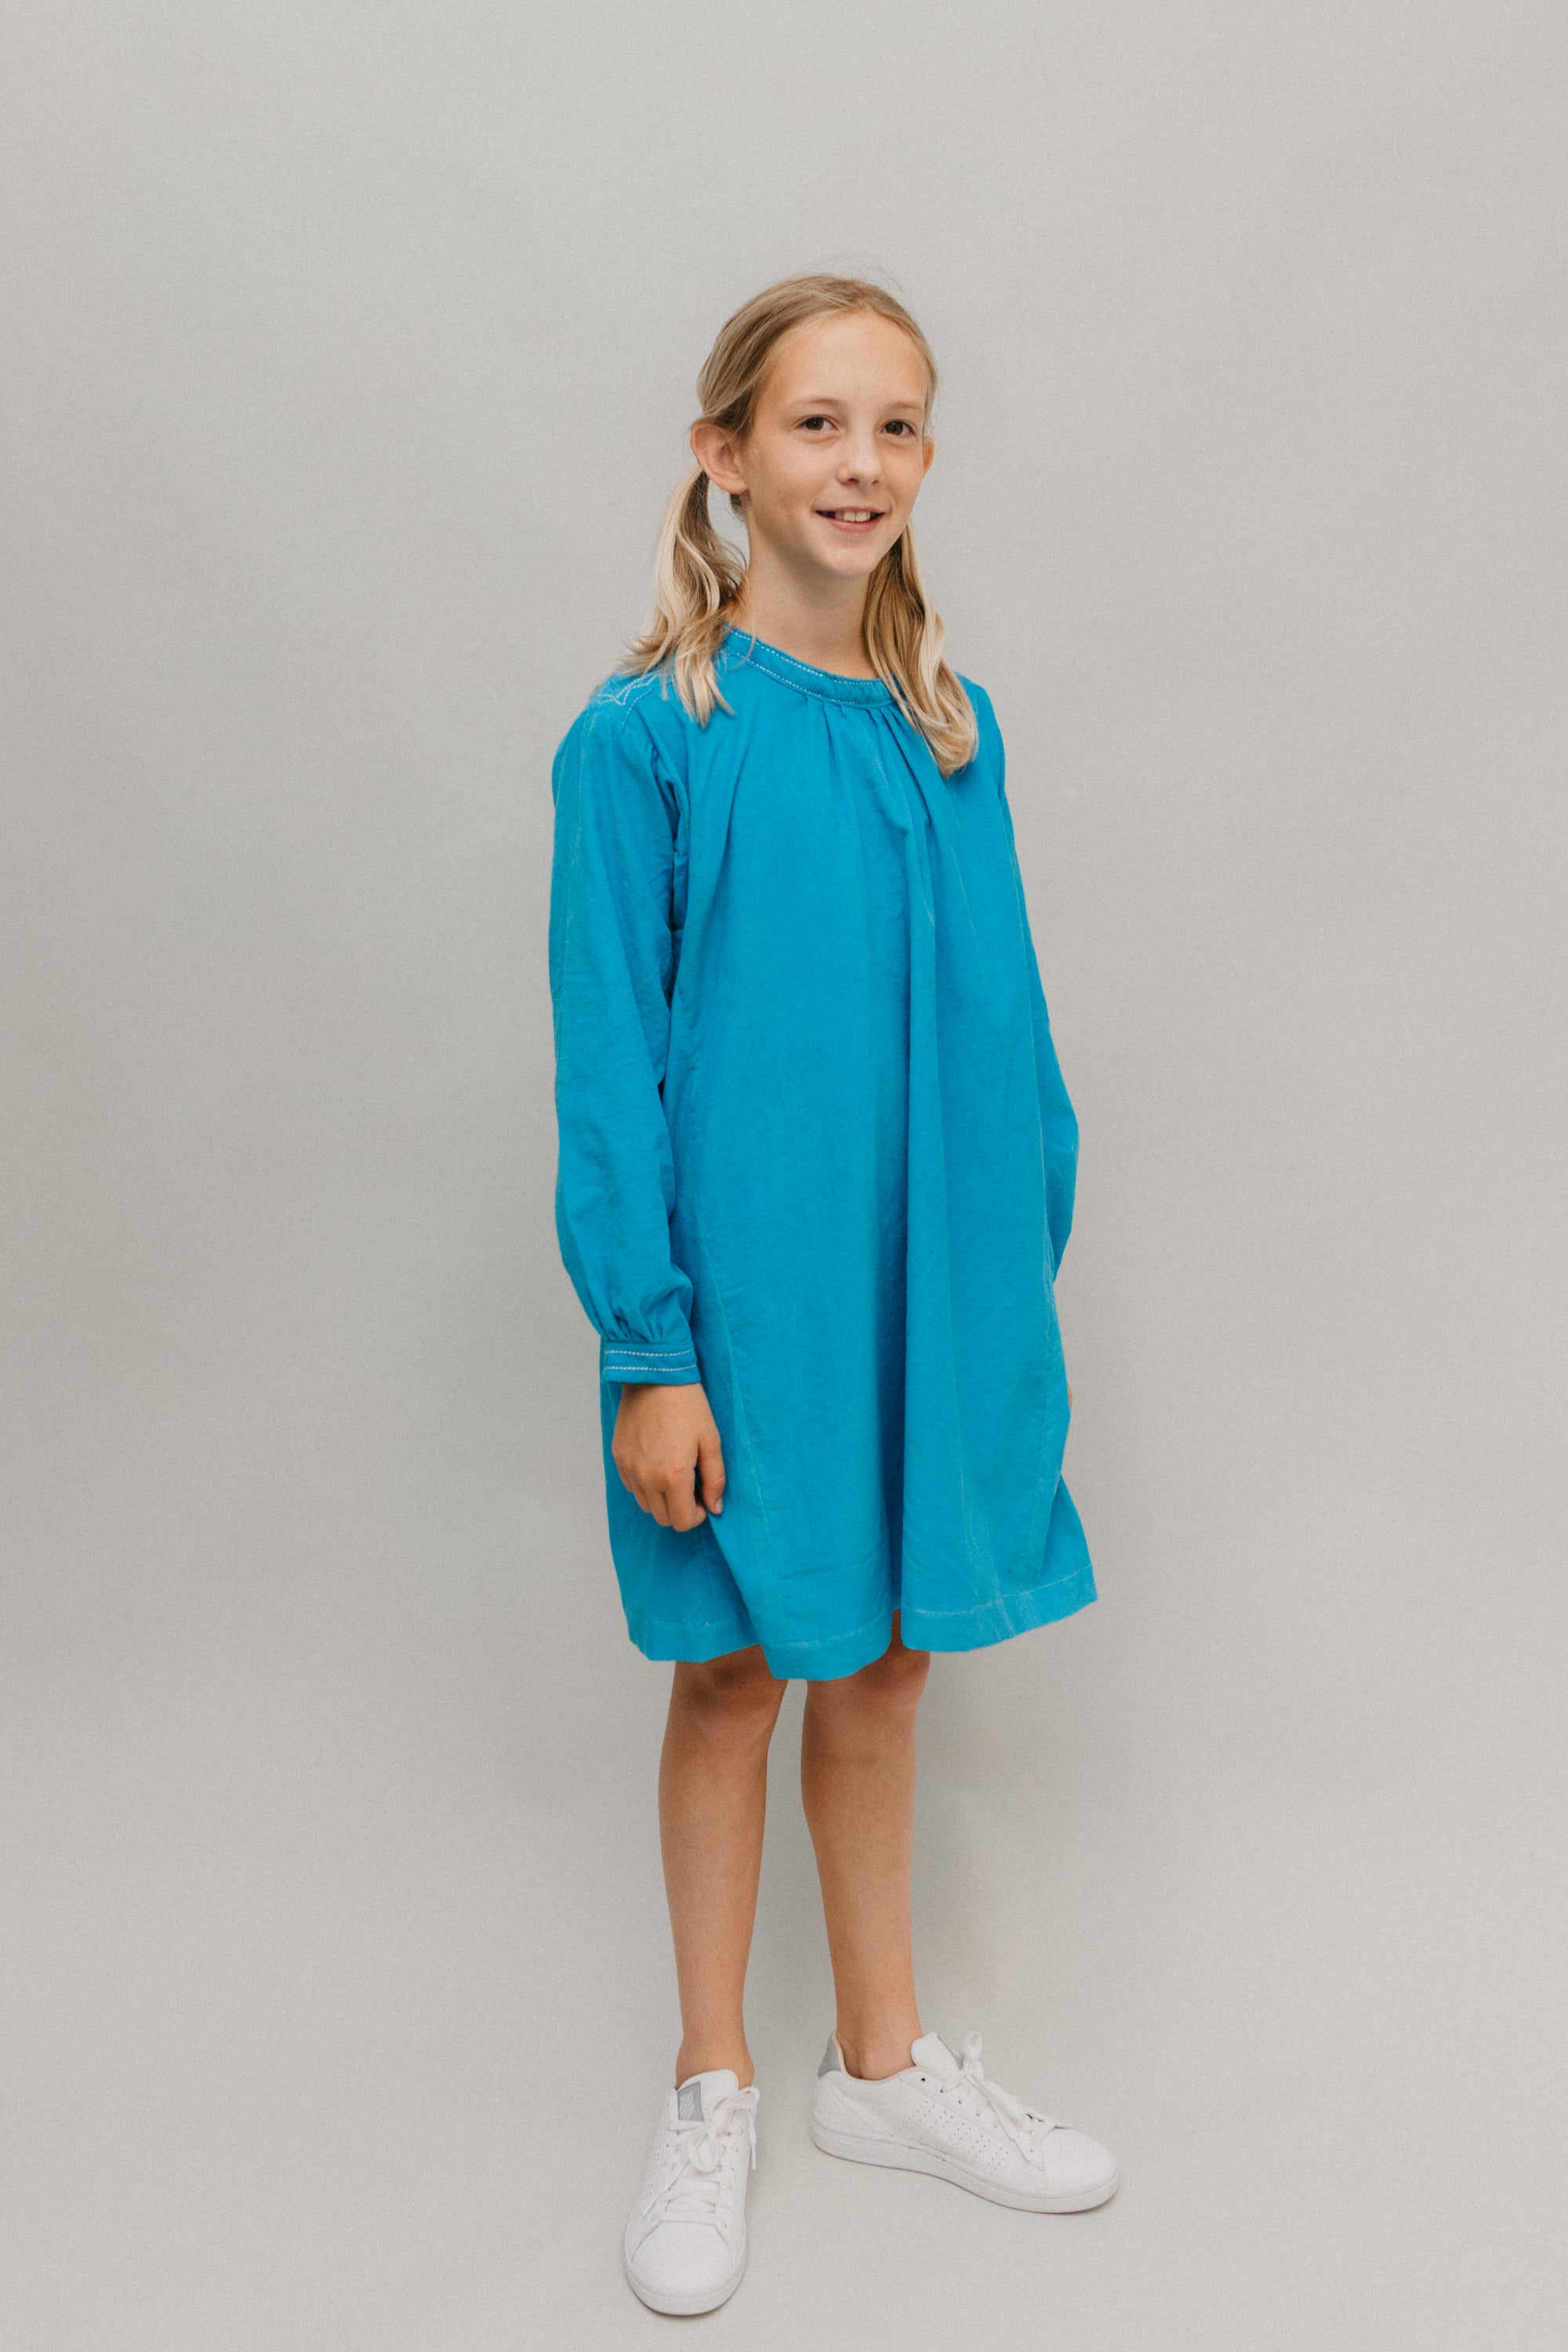 Photo of young girl wearing a blue corduroy Smock.  Model is standing in front of a white background looking towards camera.  